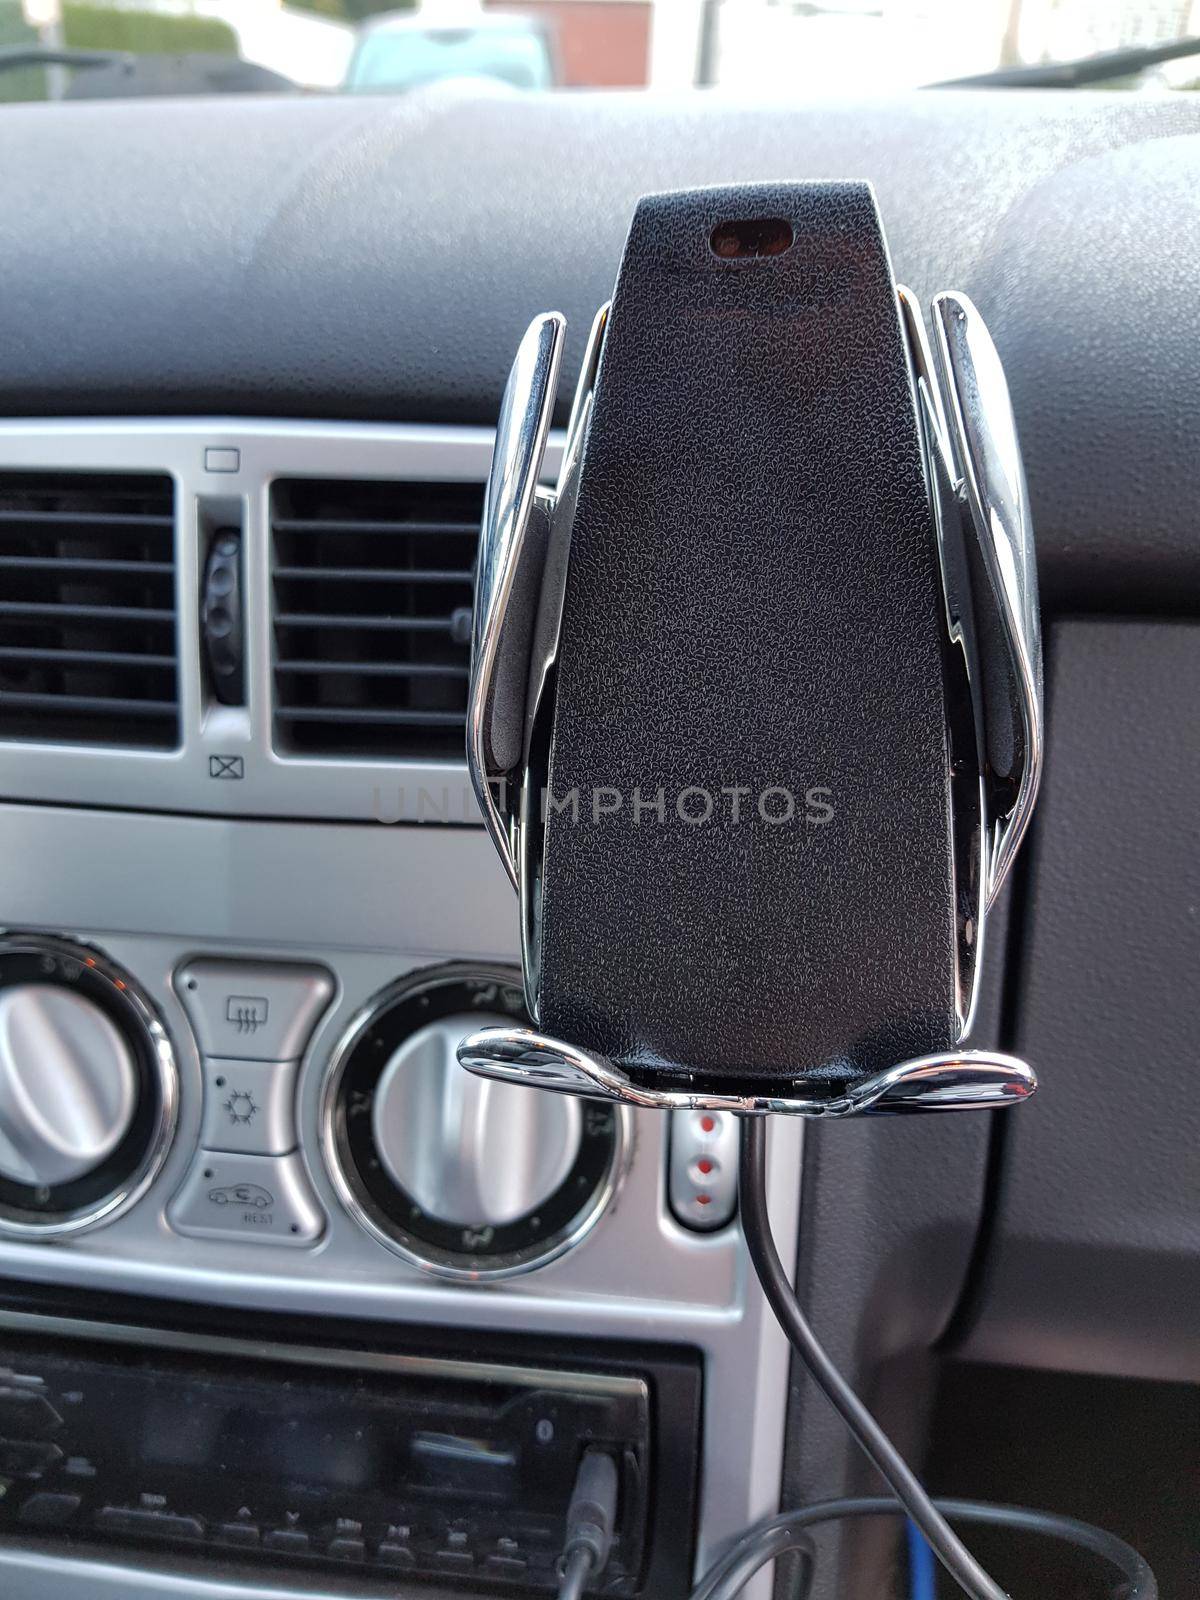 Smartphone with a screen on the dashboard of a spot car